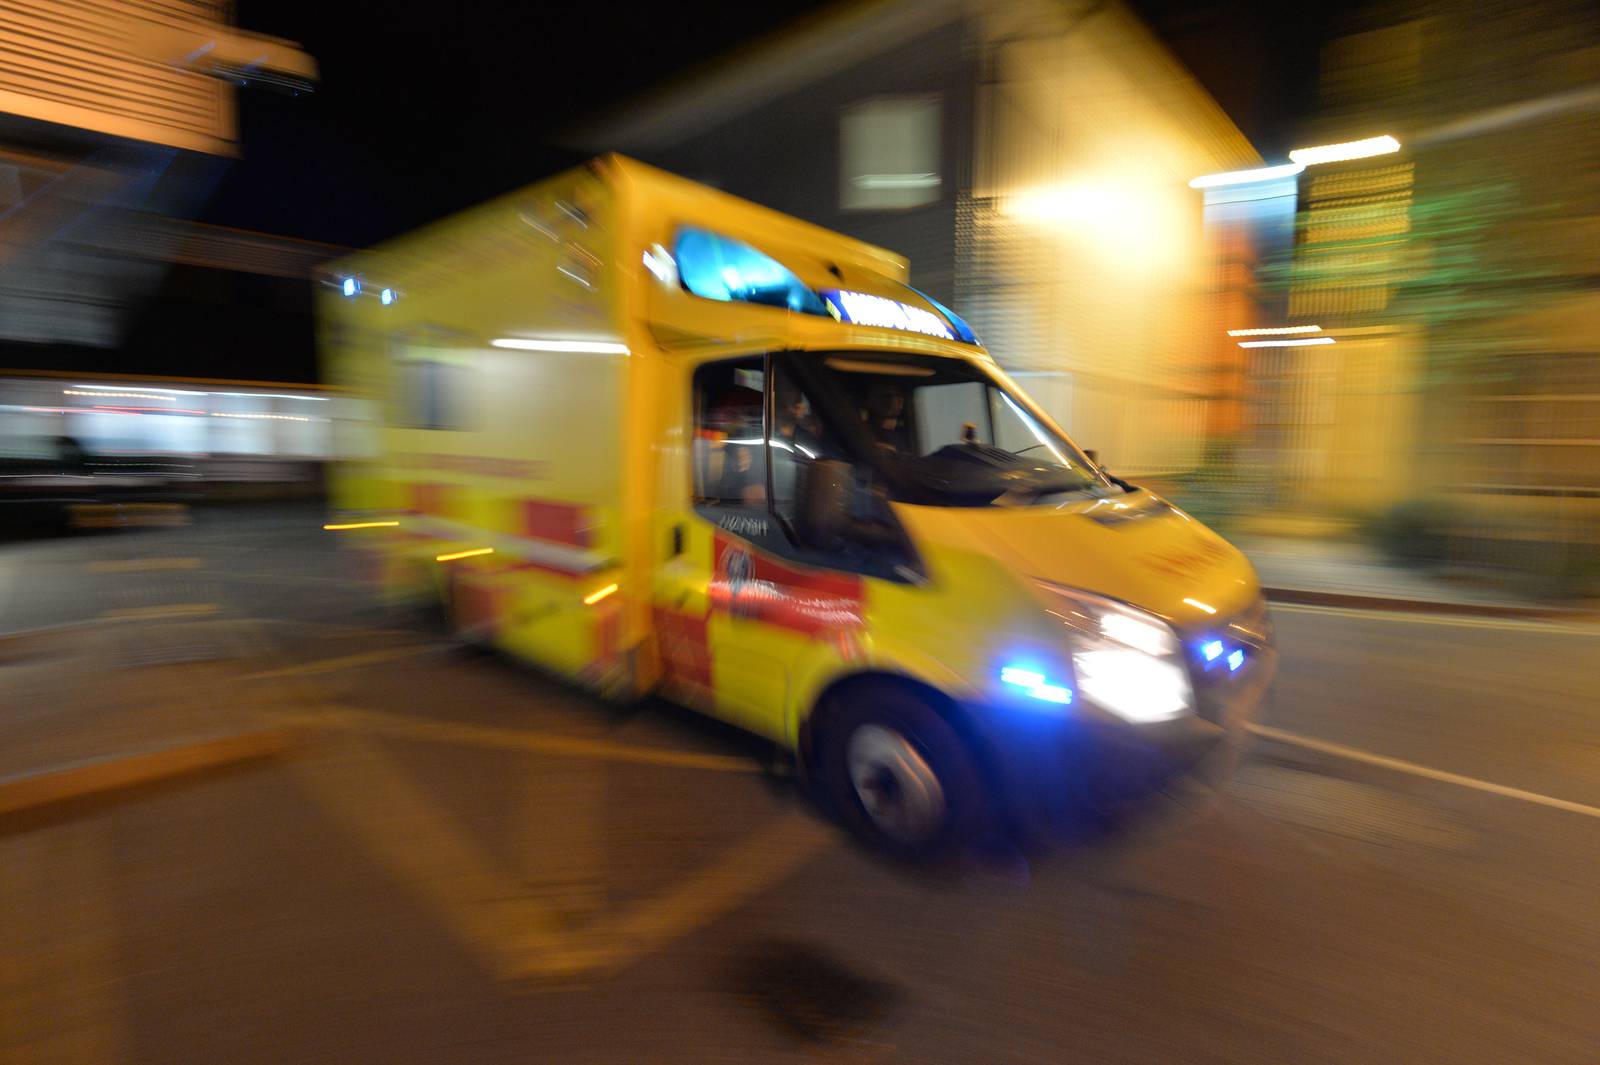 14/09/2013 - FEATURES MAGAZINE - 01.46am An Ambulance arrives bringing a patient to Medical staff working in the A&E Accident and Emergency Department of St. James's Hospital 
Photograph: Alan Betson / THE IRISH TIMES              

         


AMBULANCE  ... STOCK..... FILE...